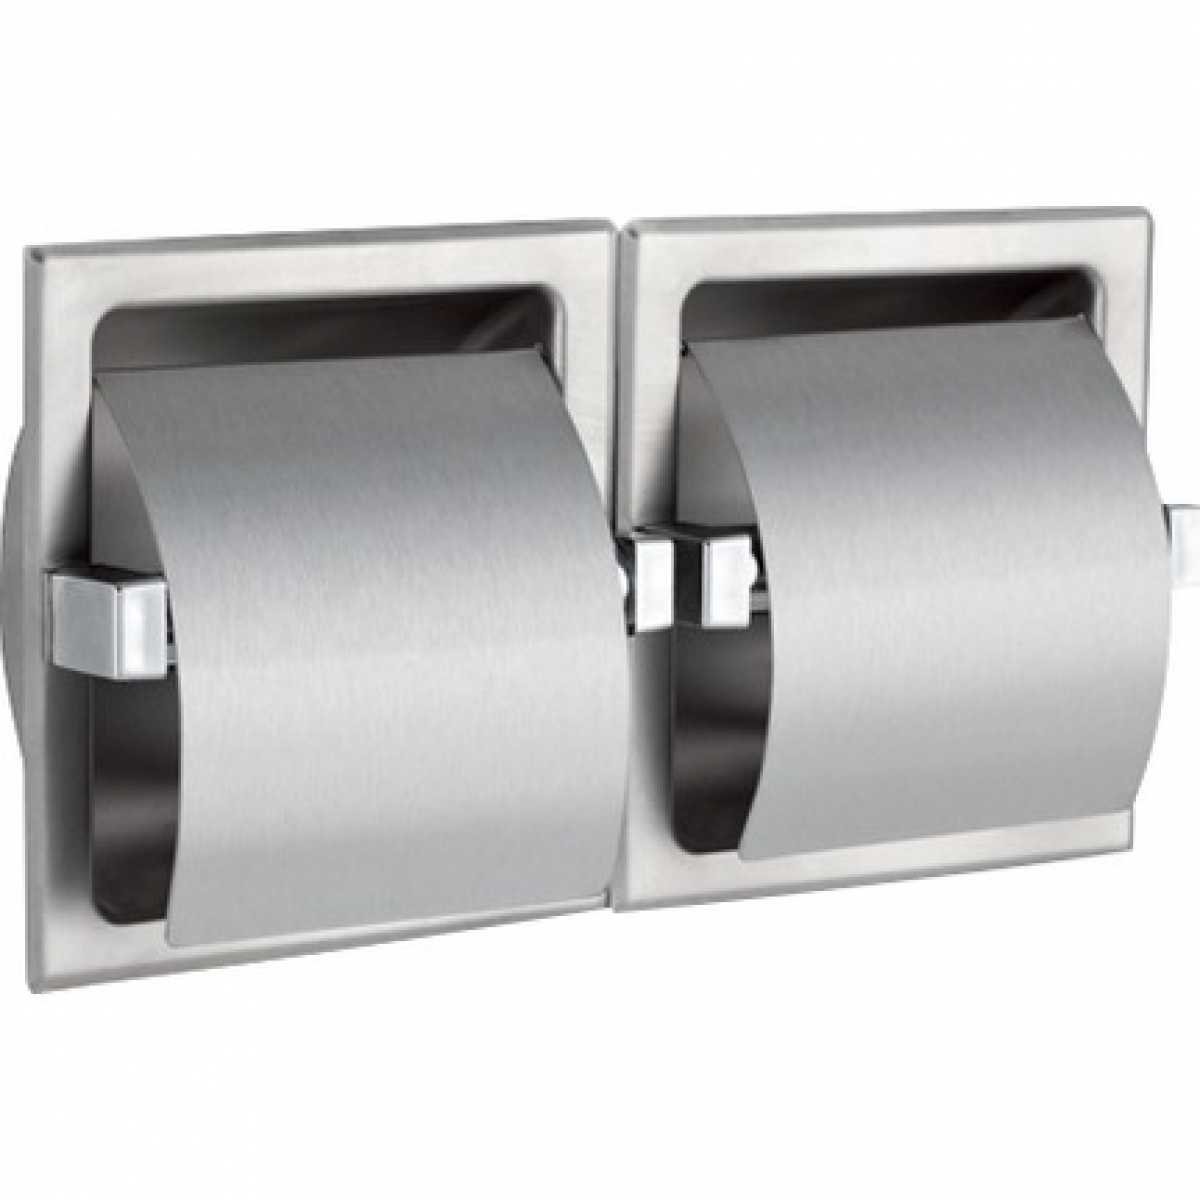 Toilet Roll Holder Recessed, Double